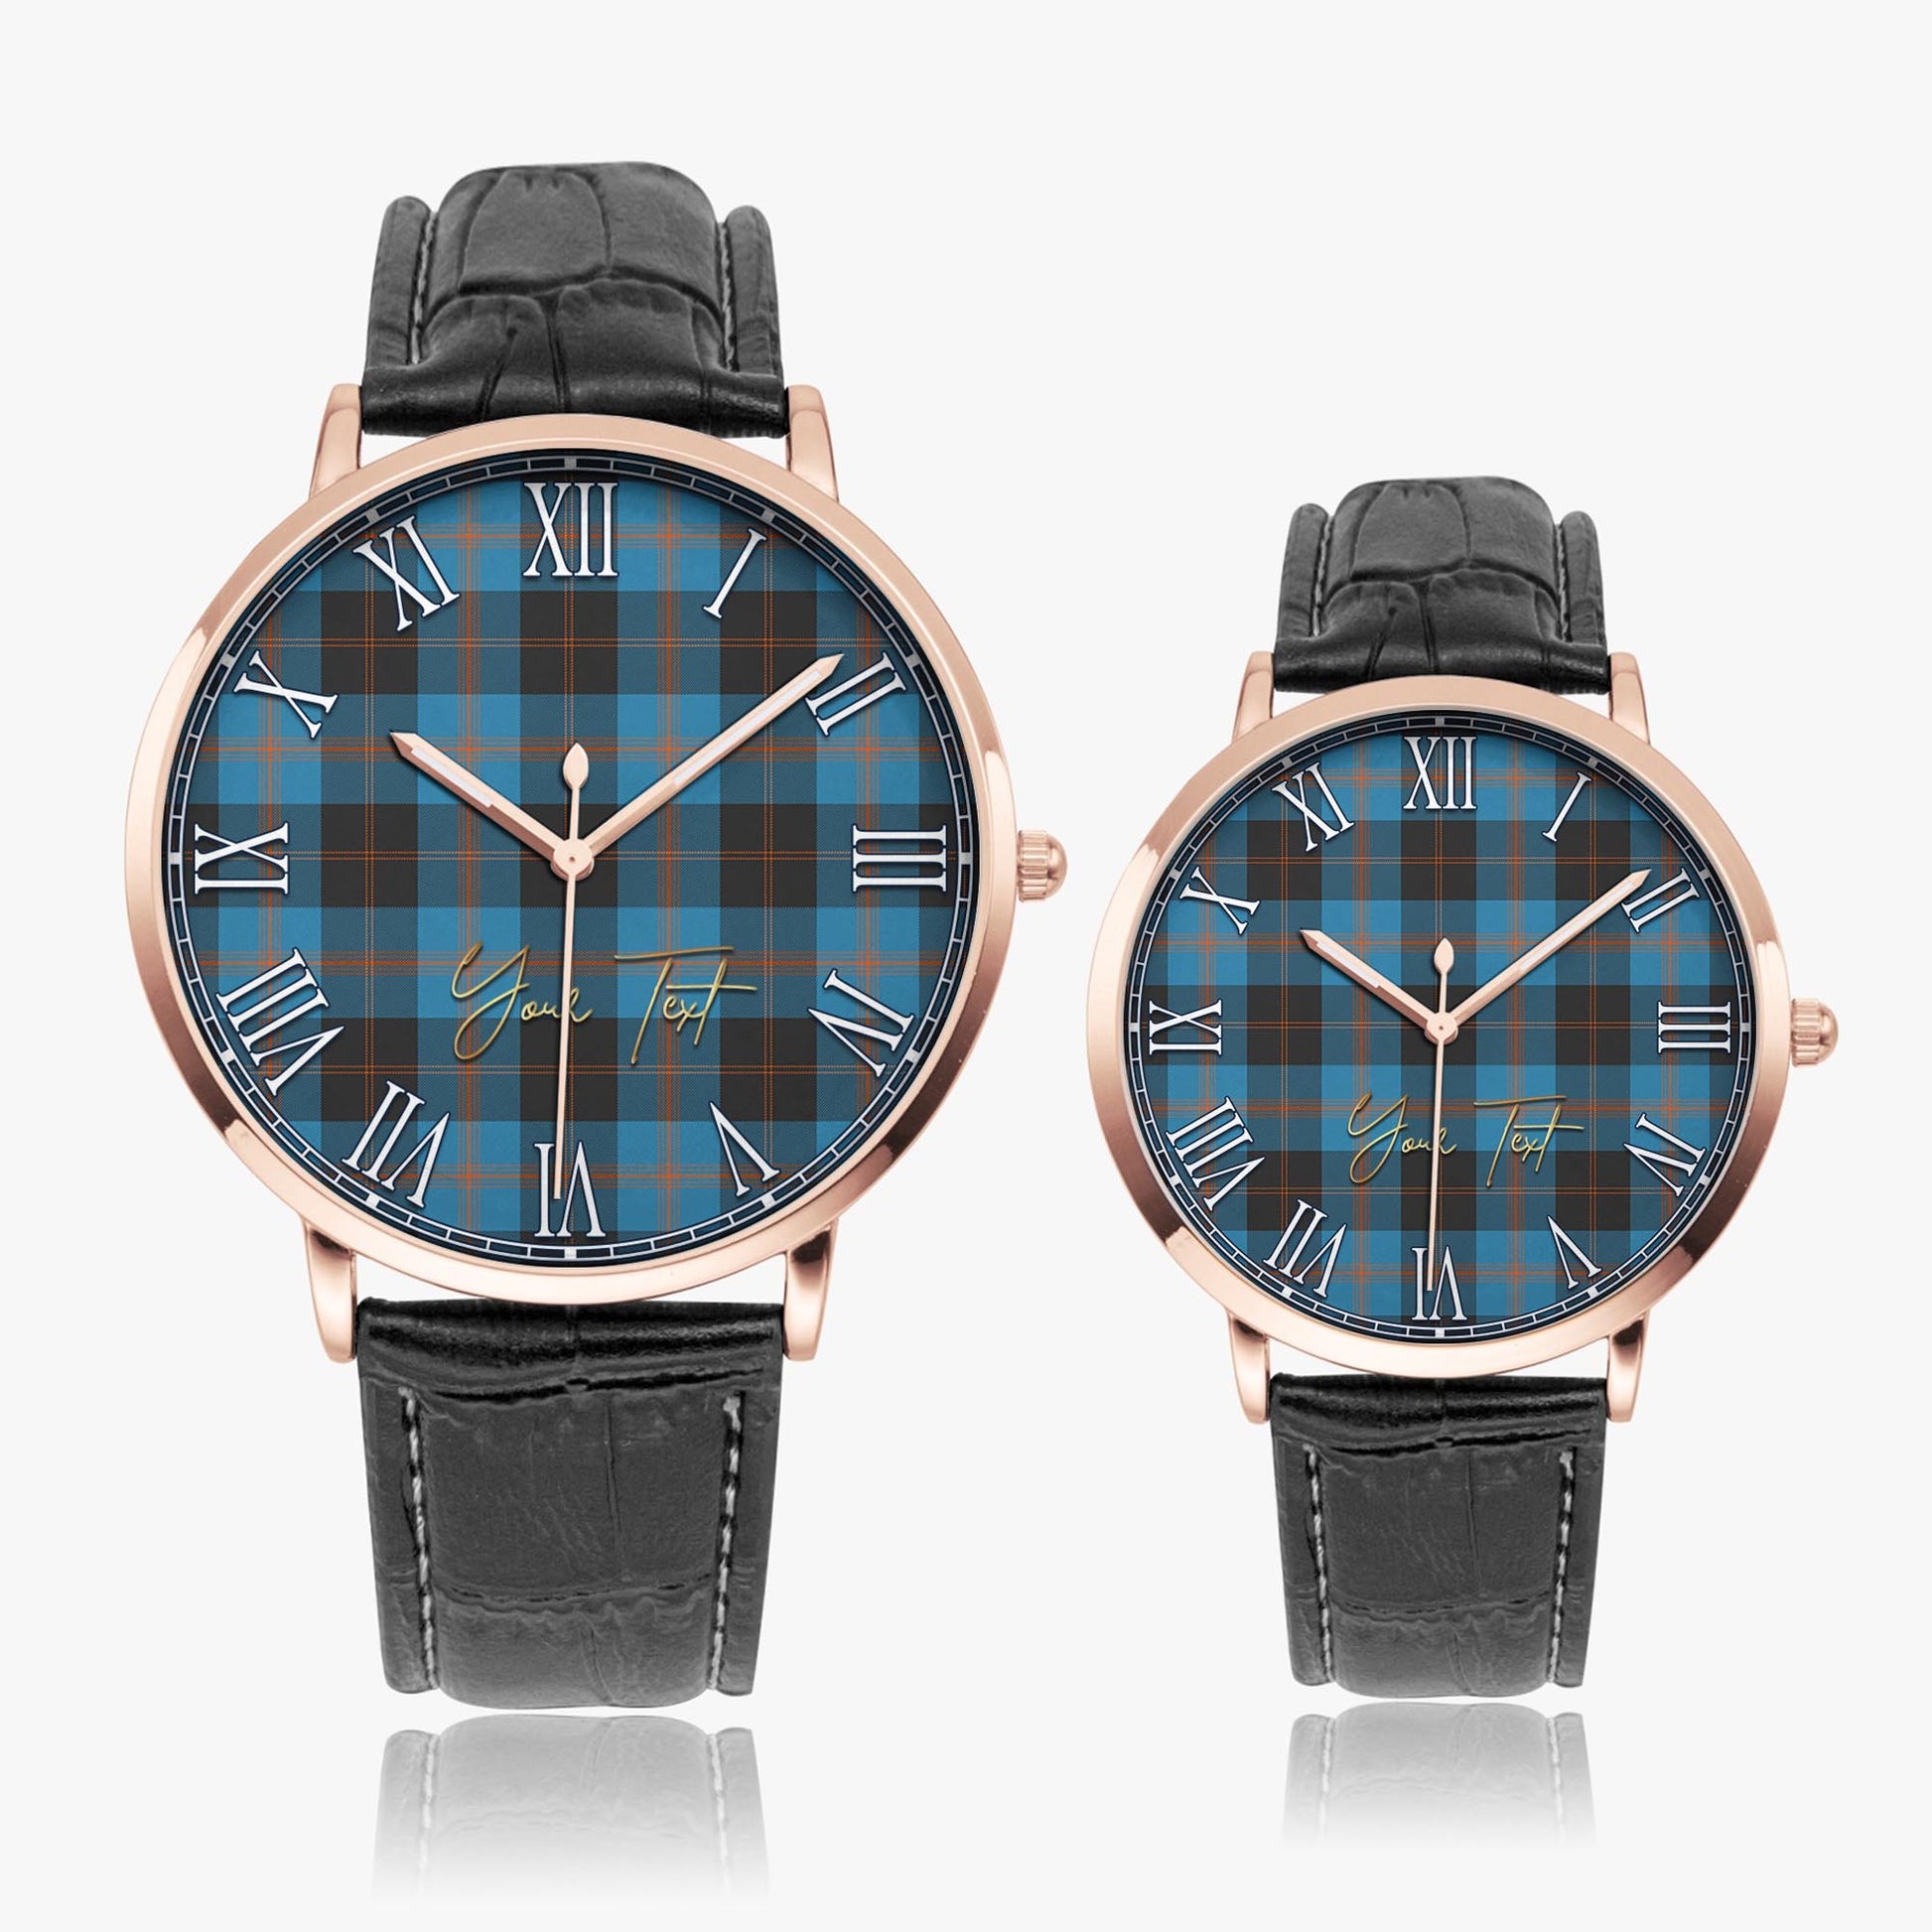 Garden Tartan Personalized Your Text Leather Trap Quartz Watch Ultra Thin Rose Gold Case With Black Leather Strap - Tartanvibesclothing